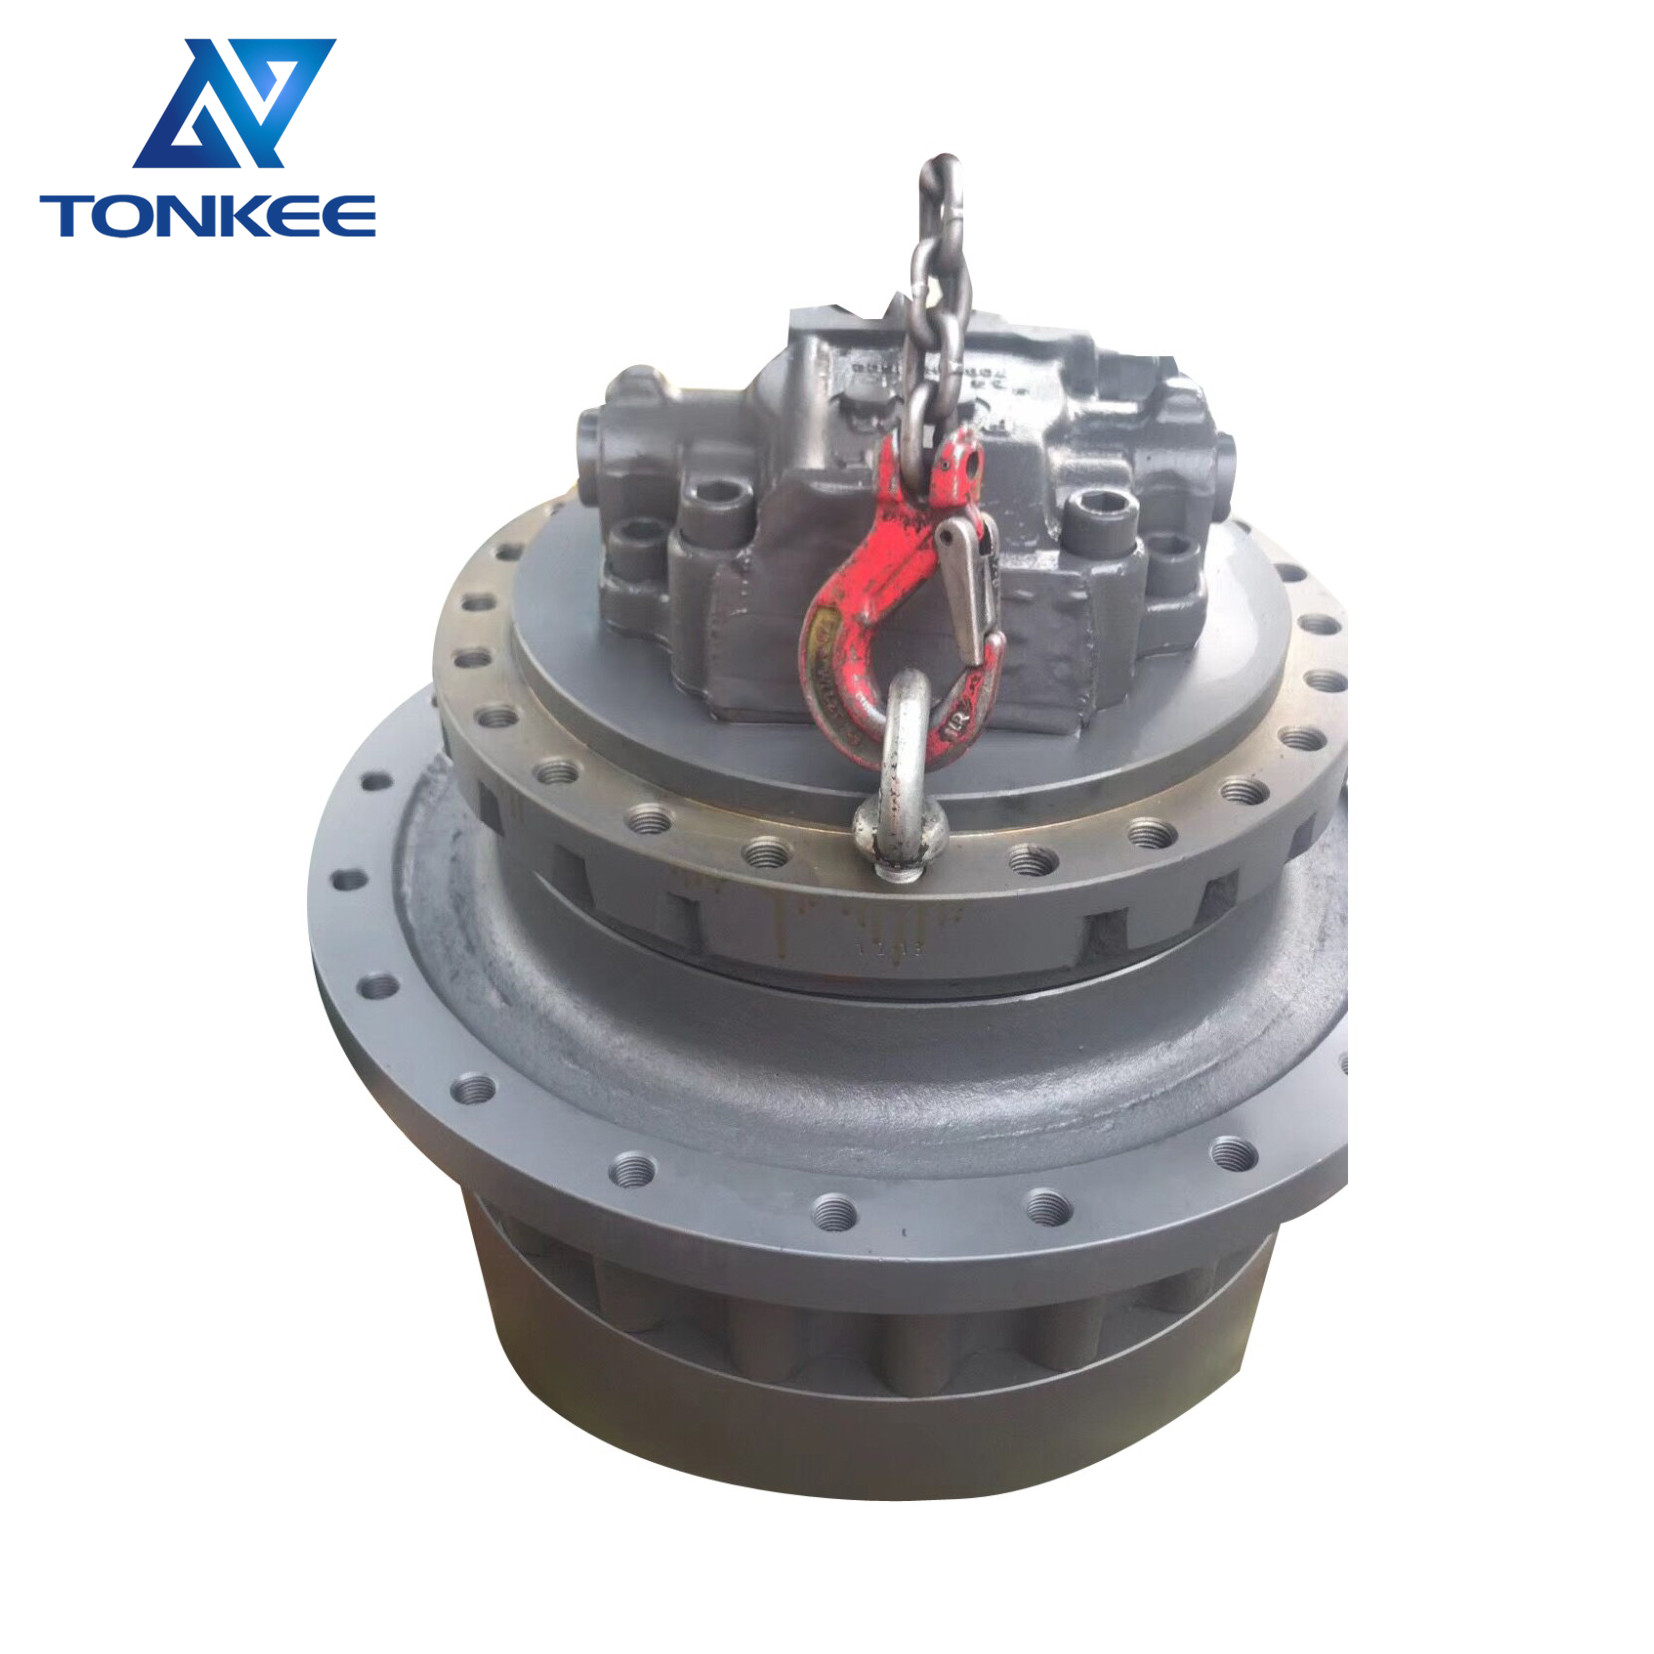 207-27-00370 207-27-00371 207-27-00260 final drive assembly PC300-7 PC350-7 PC360-7 excavator travel motor assy